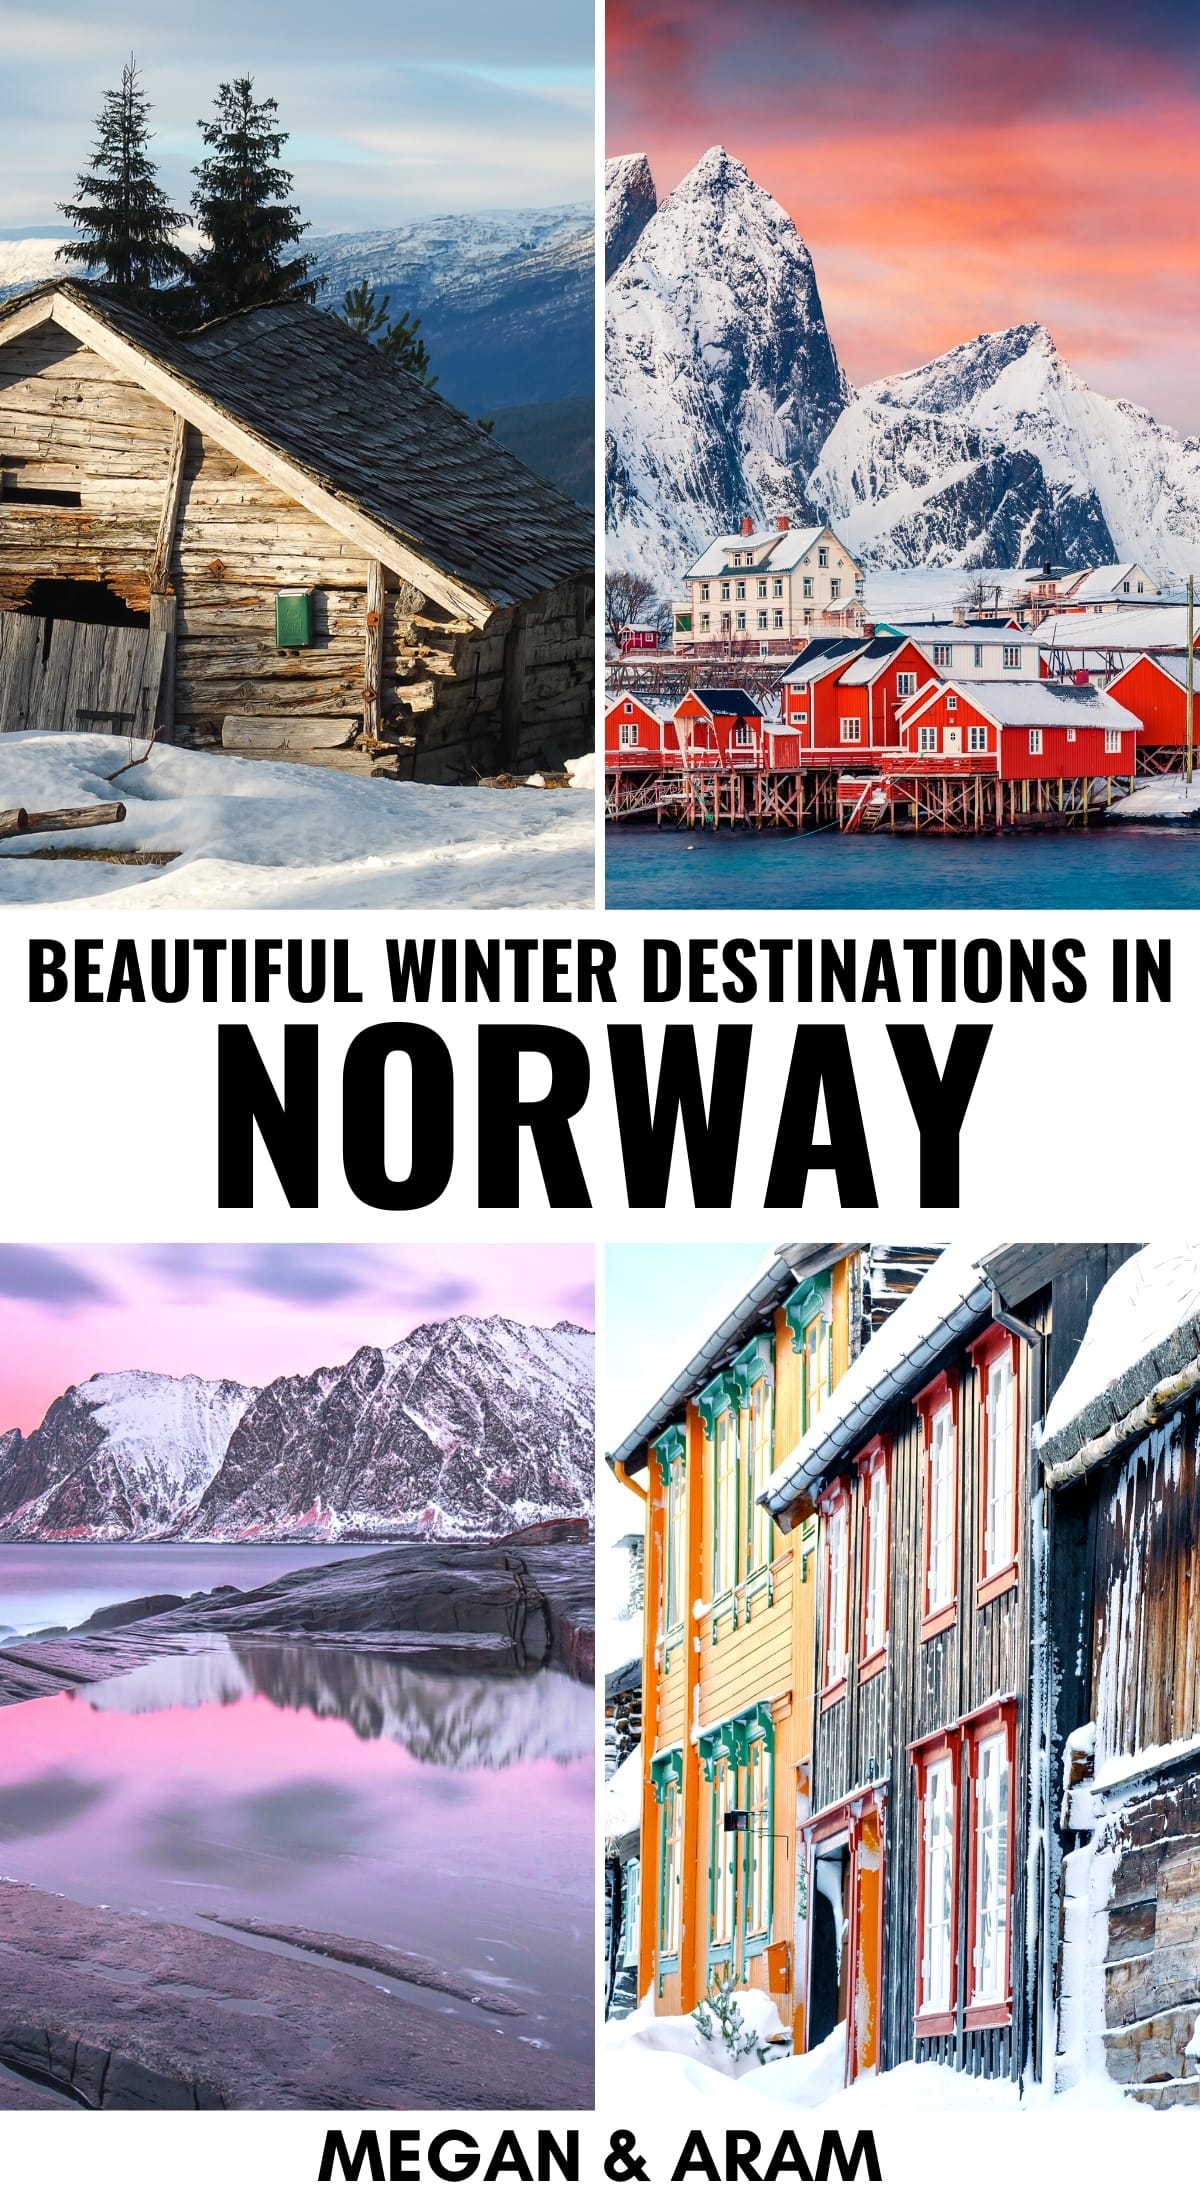 Considering a trip to Norway in winter? This guide will walk you through the best places to visit in Norway in winter and tell you the pros and cons of each. Tromso excluded! | Places to visit in Norway | Norway in winter | Norway winter trips | Norway winter destinations | Tromso | Lofoten Islands | Bergen | Oslo | Northern lights in Norway | Where to see the northern lights in Norway | Visit Norway | Winter in Norway | Christmas in Norway | Norway in December | Norway destinations | Norway nature